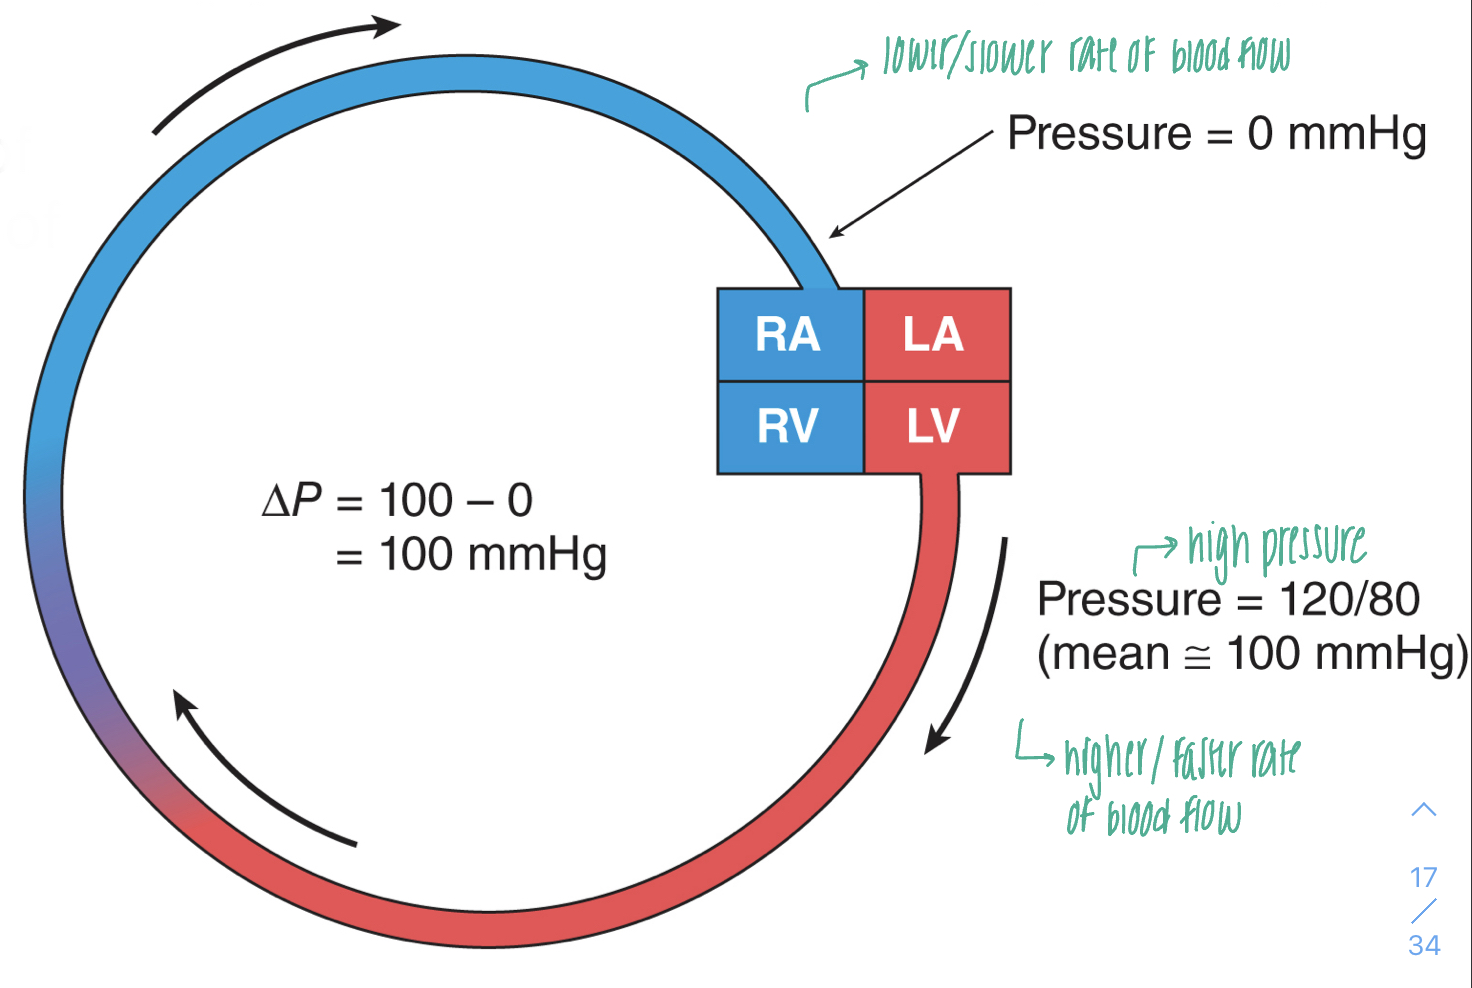 <ul><li><p>blood flows from a region of higher pressure (arteries) to a region of lower pressure (veins); pressure gradient pushing blood forward</p></li><li><p>the rate of blood flow is proportional to the difference in pressure</p></li></ul>